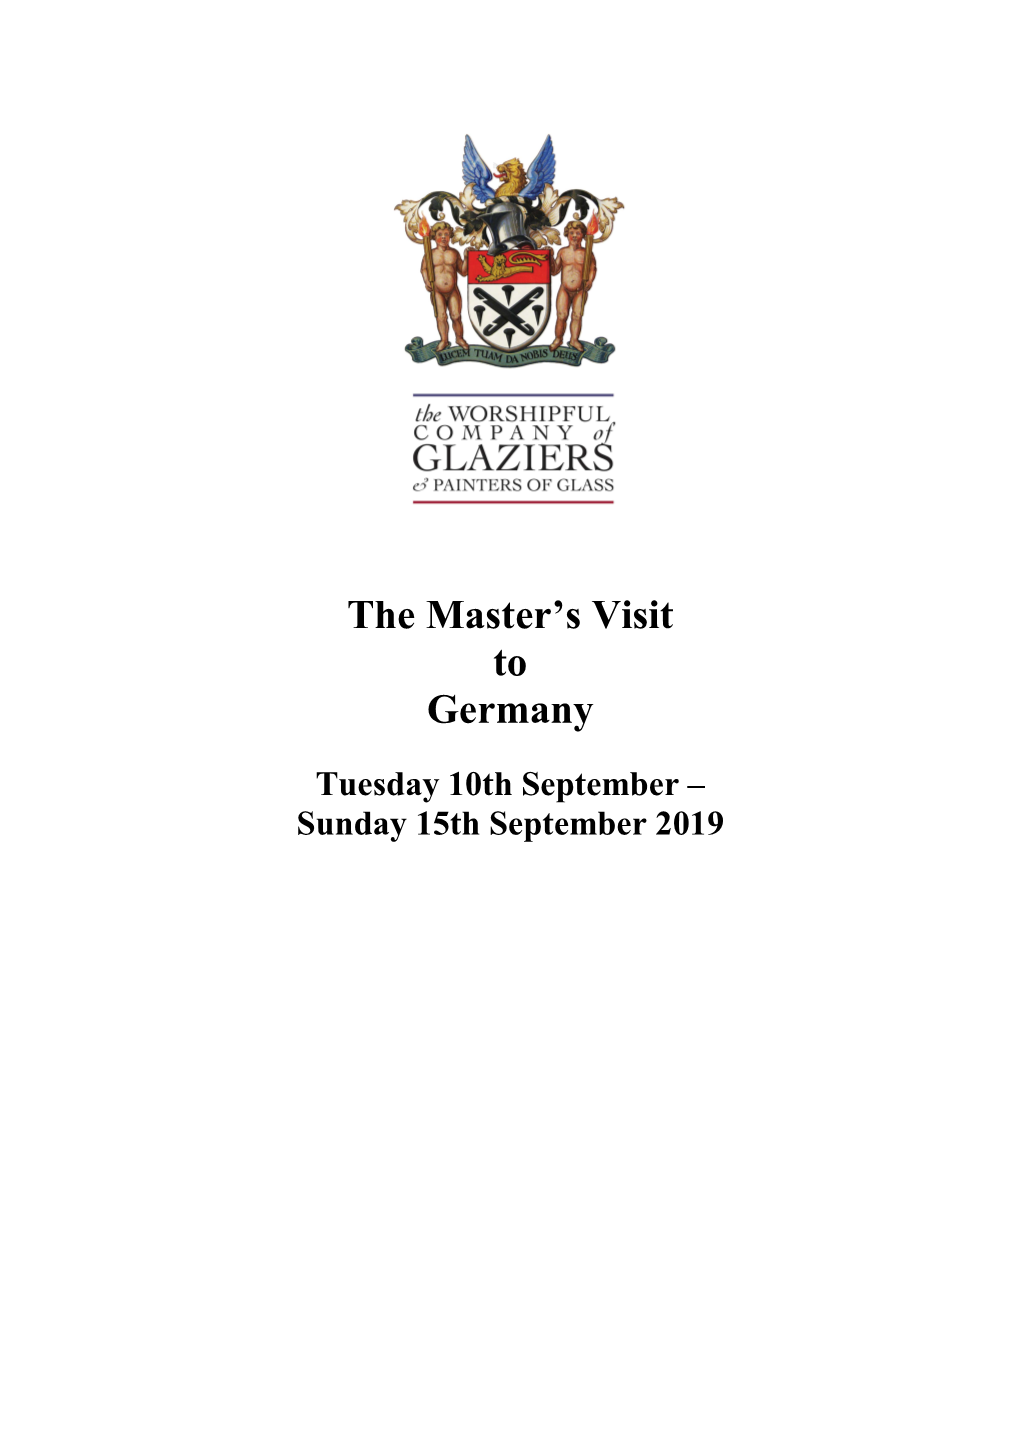 The Master's Visit to Germany